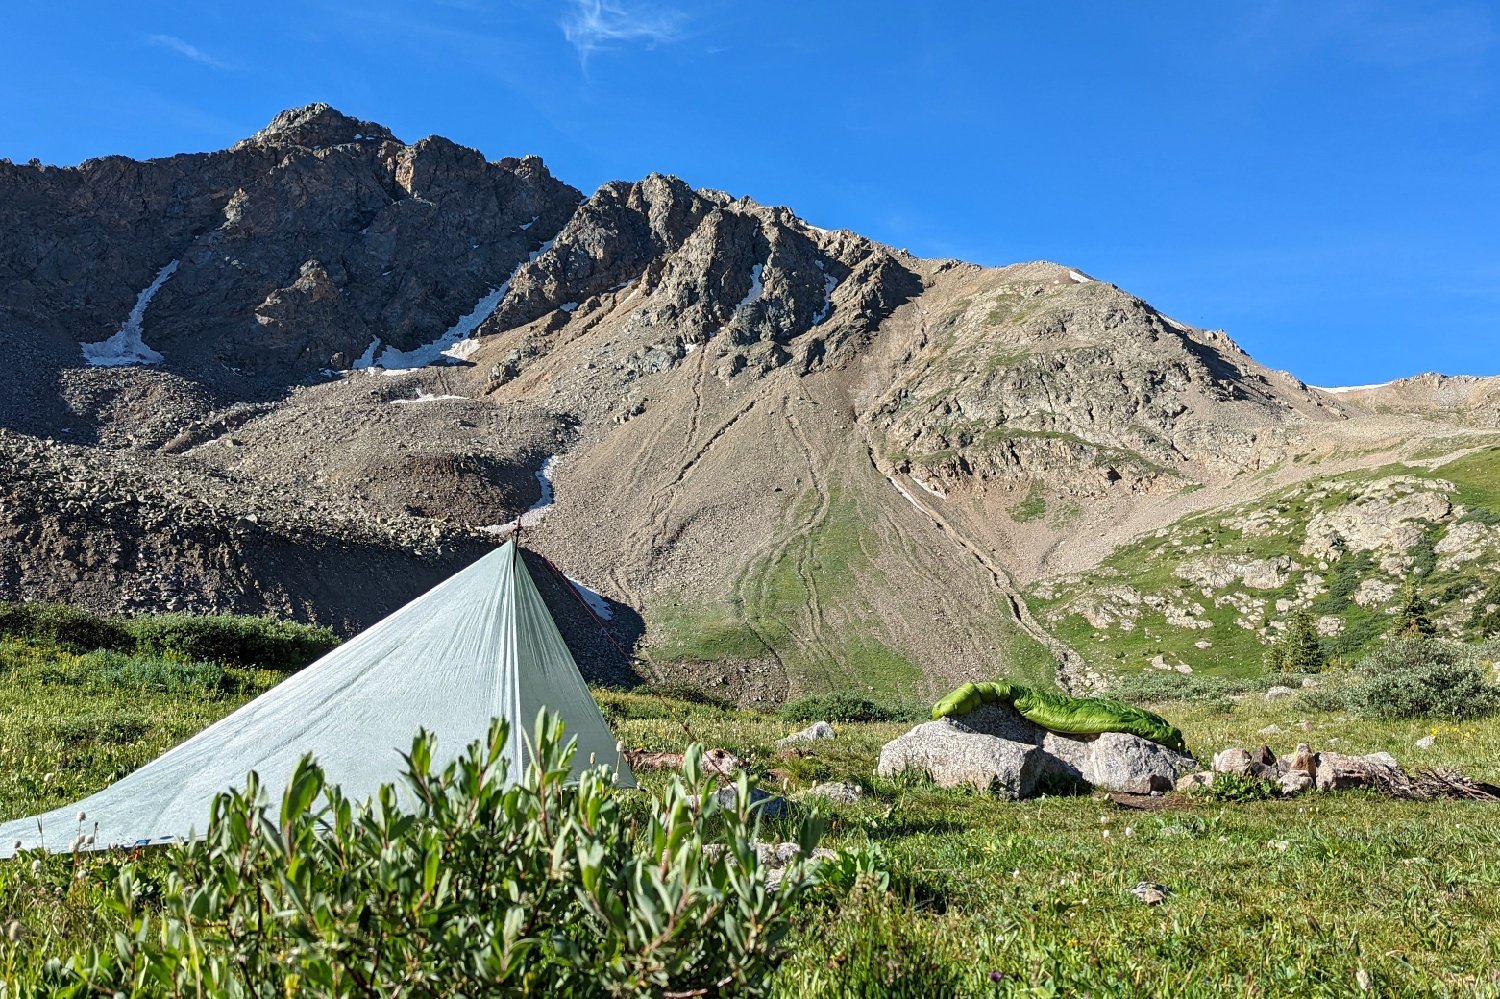 The Zpacks 7x9 Flat Tarp set up in front of a mountain